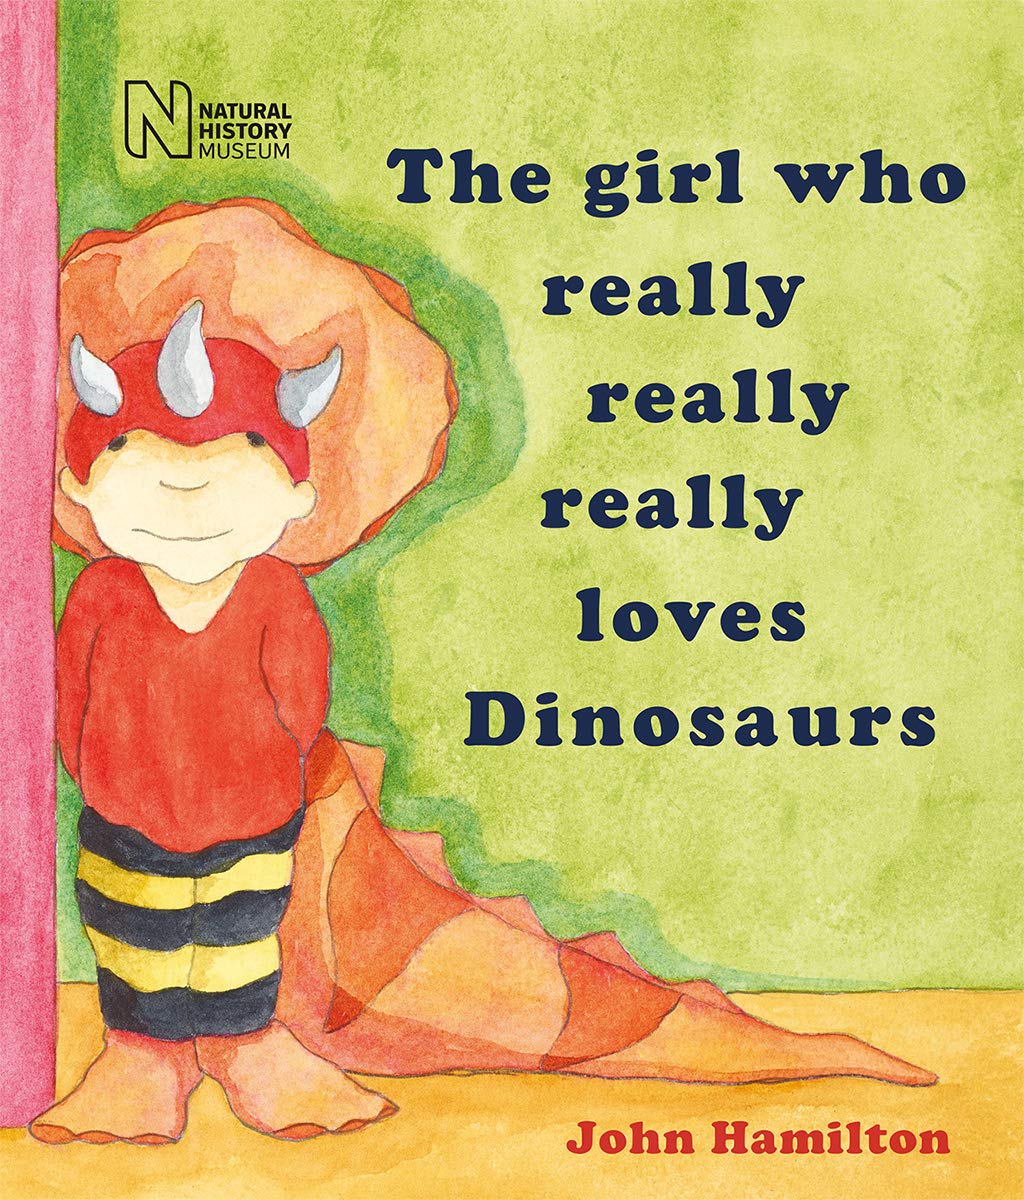 The Girl Who Really Loved Dinosaurs (book)